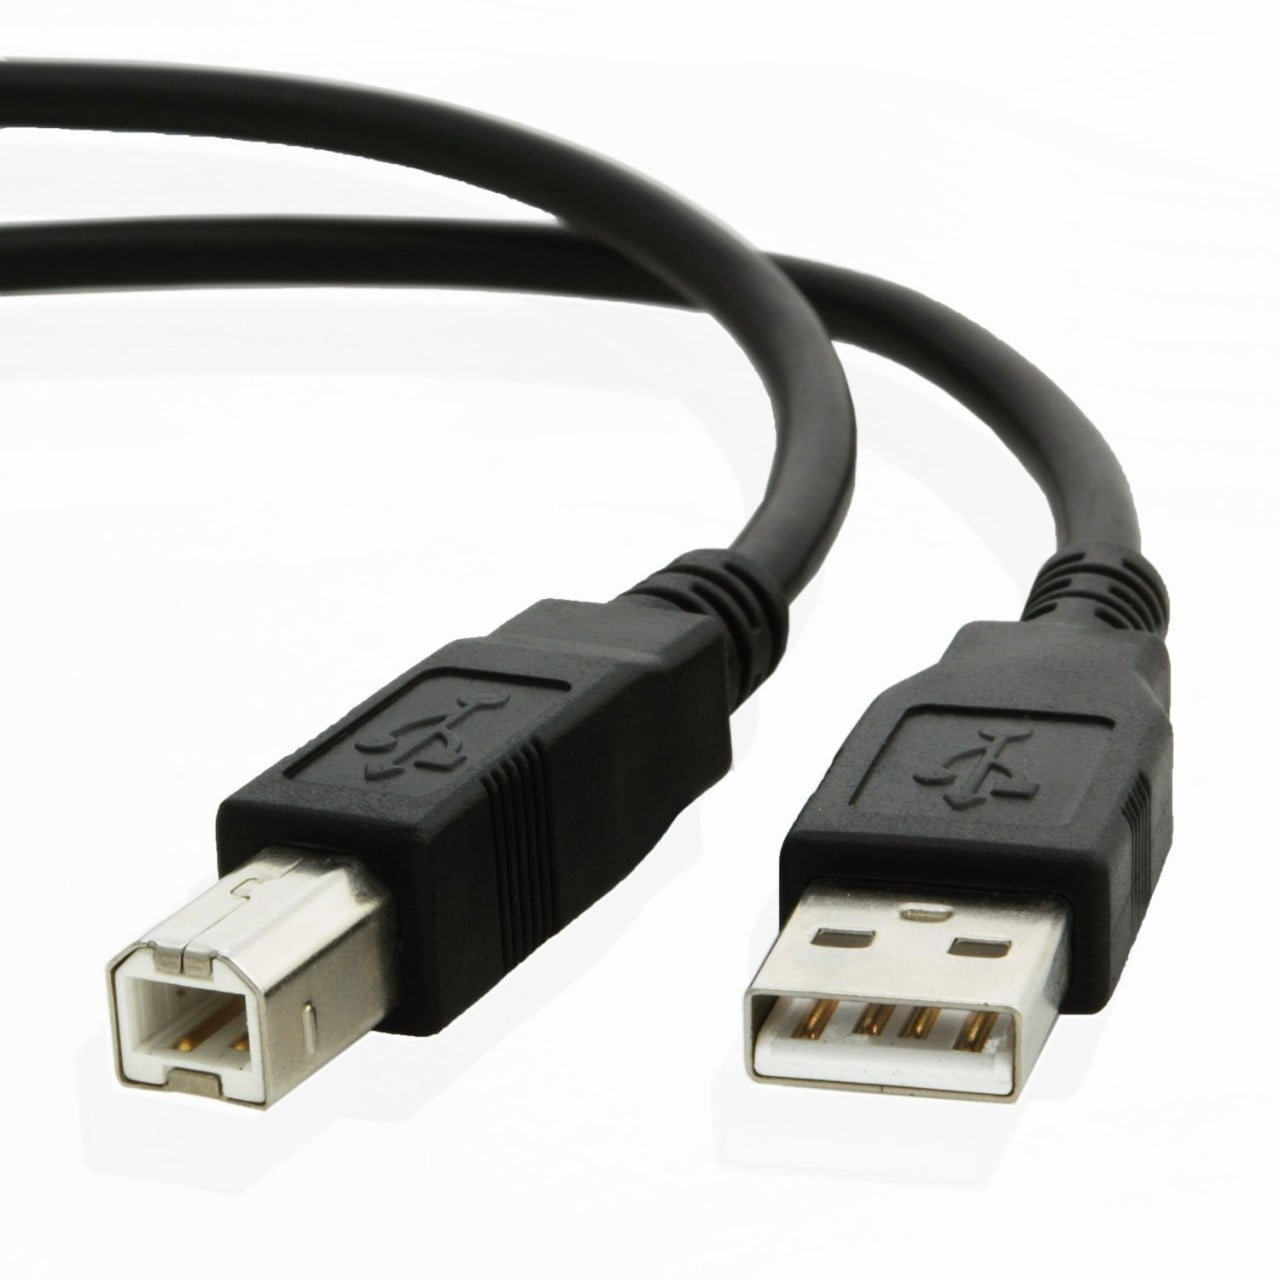 50ft USB 2.0 Extension & 10ft A Male/B Male Cable for HP Laserjet p1005 Printer